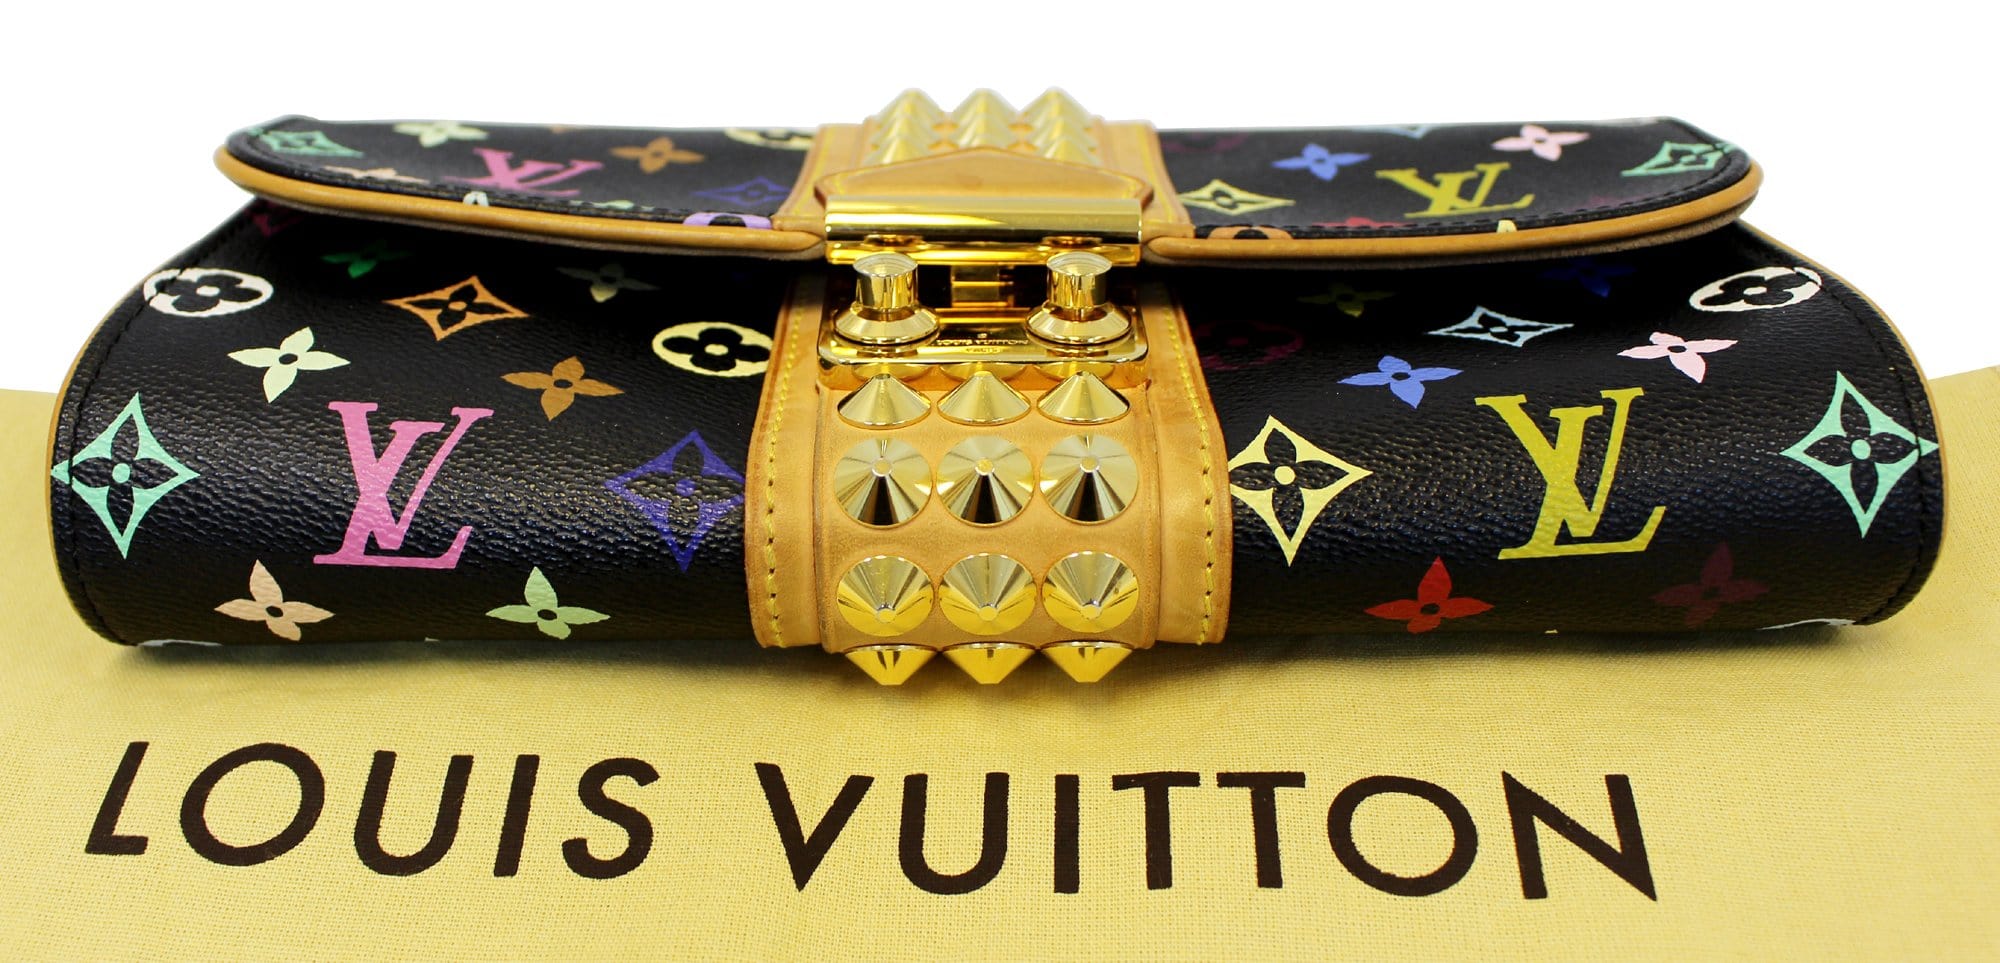 Louis Vuitton Courtney - For Sale on 1stDibs  louis vuitton courtney clutch,  lv courtney, louis vuitton courtney bag